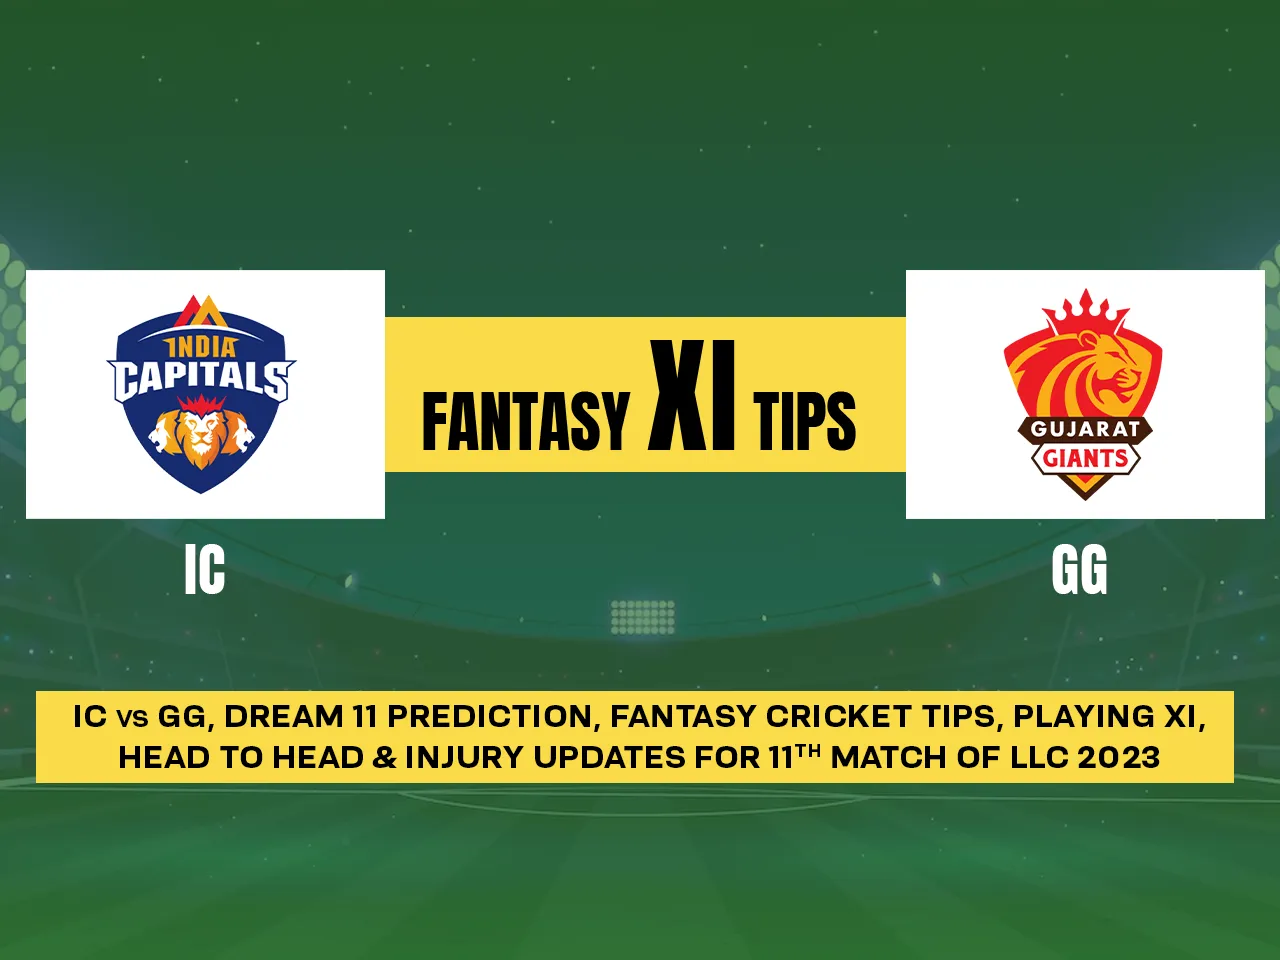 Legends League Cricket 2023: IC vs GG Dream11 Prediction, Playing XI, Head-to-Head Stats, and Pitch Report for Match 11